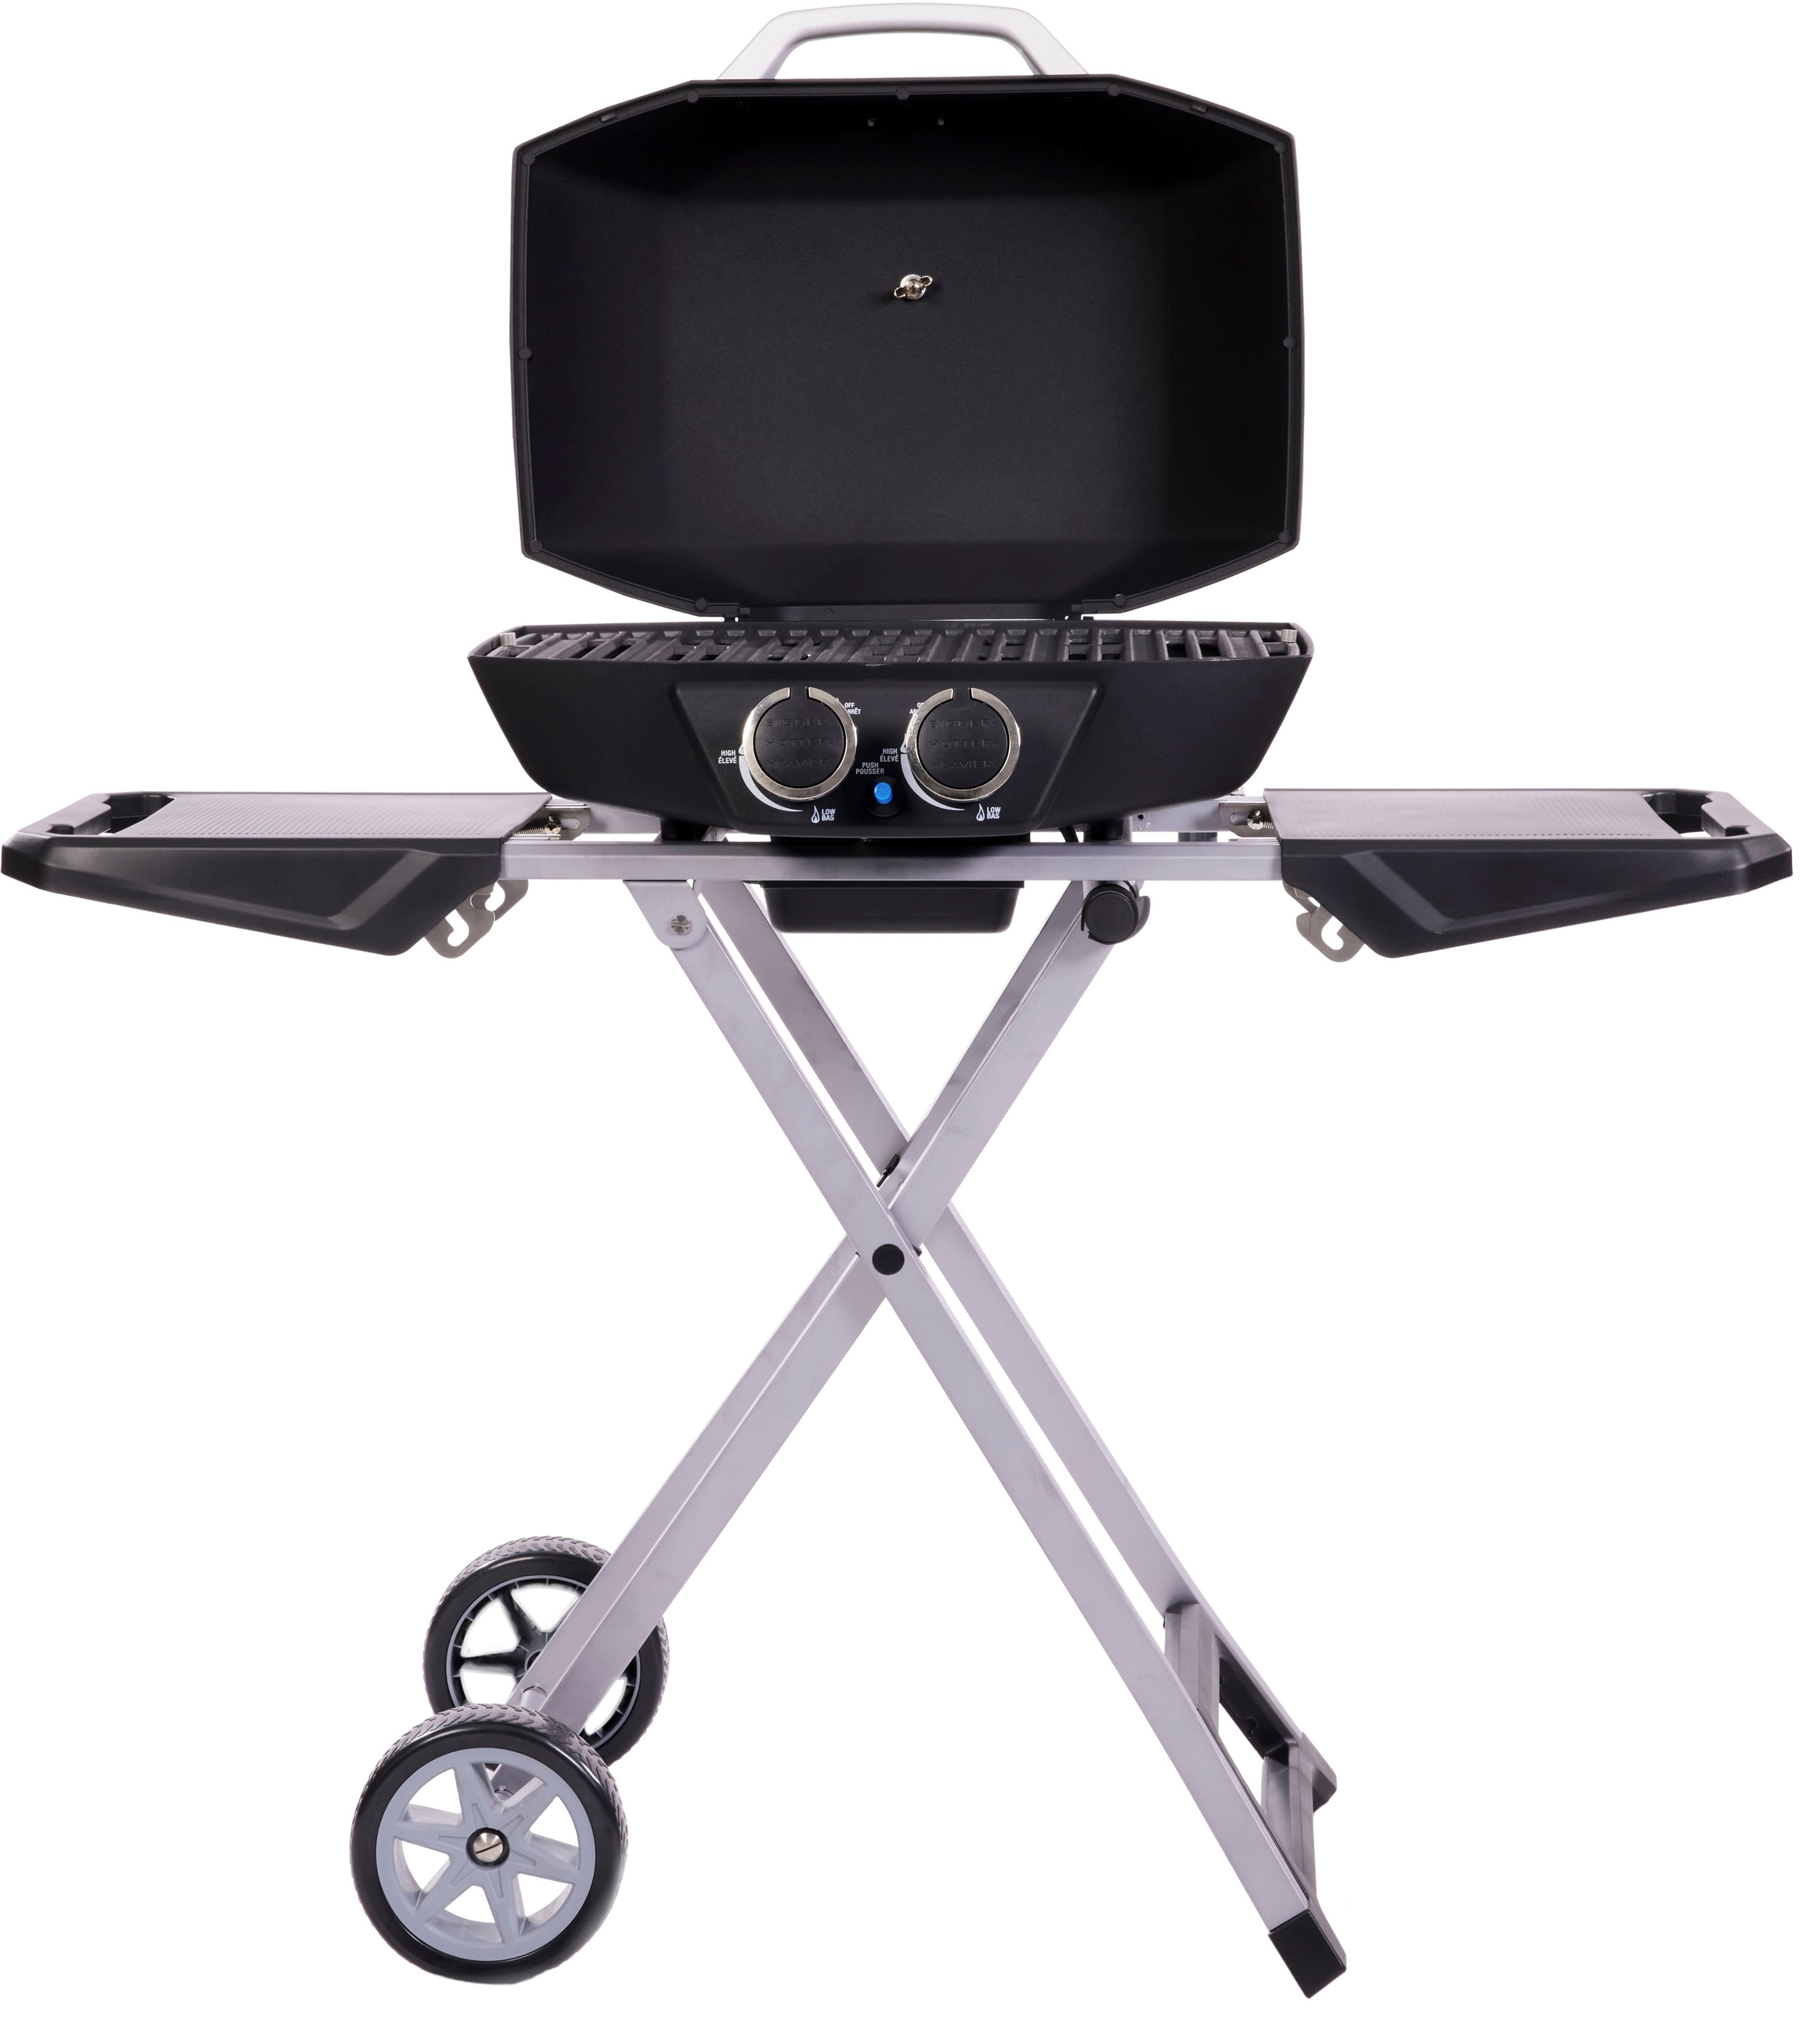 2 Burner Table Top Gas Grill